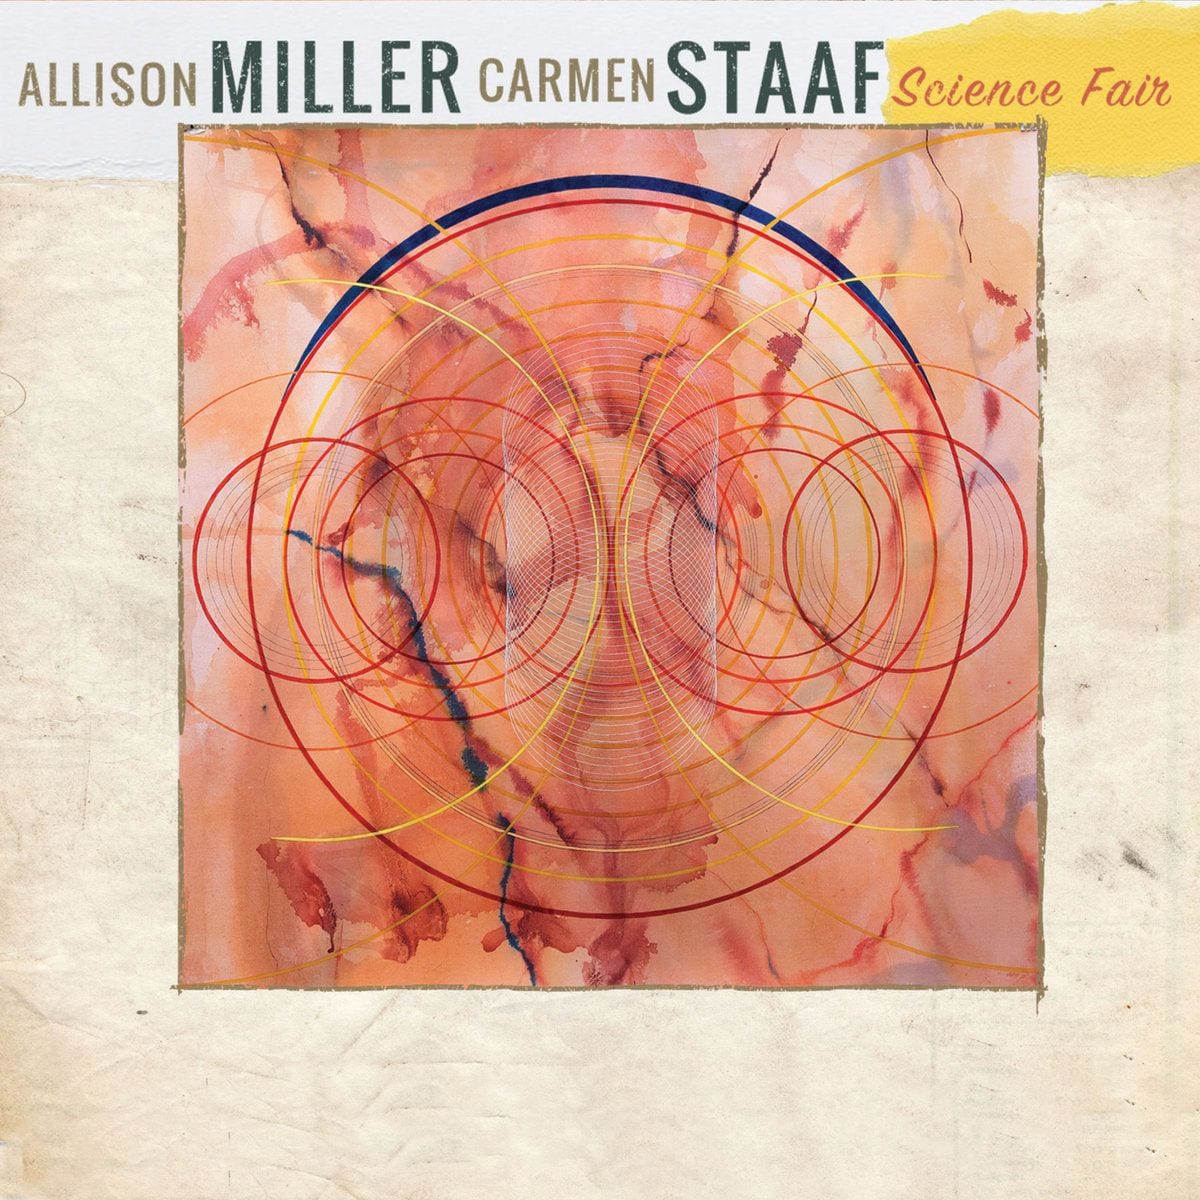 Allison Miller and Carmen Staaf Create a Set of Varied and Appealing Modern Jazz on ‘Science Fair’